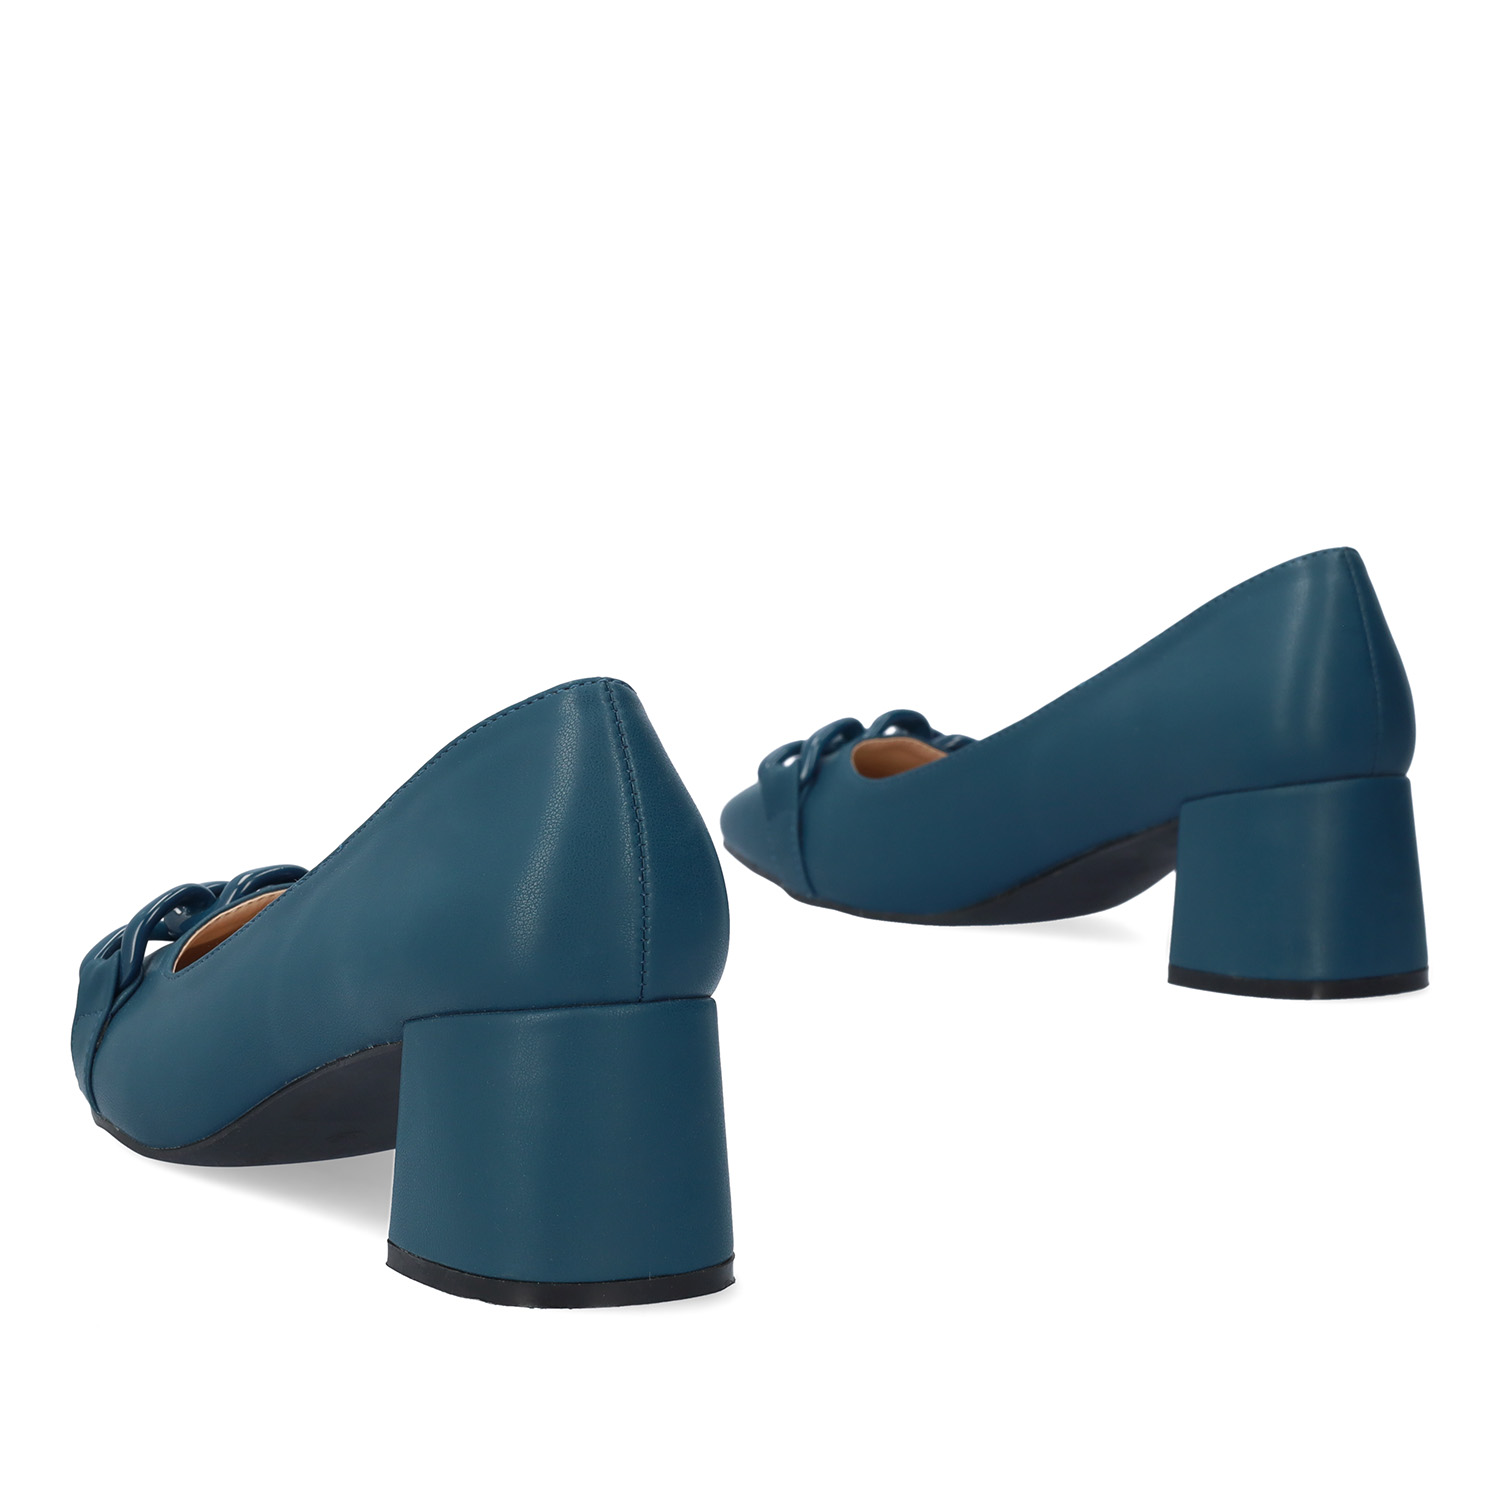 Heeled shoes in blue faux leather 